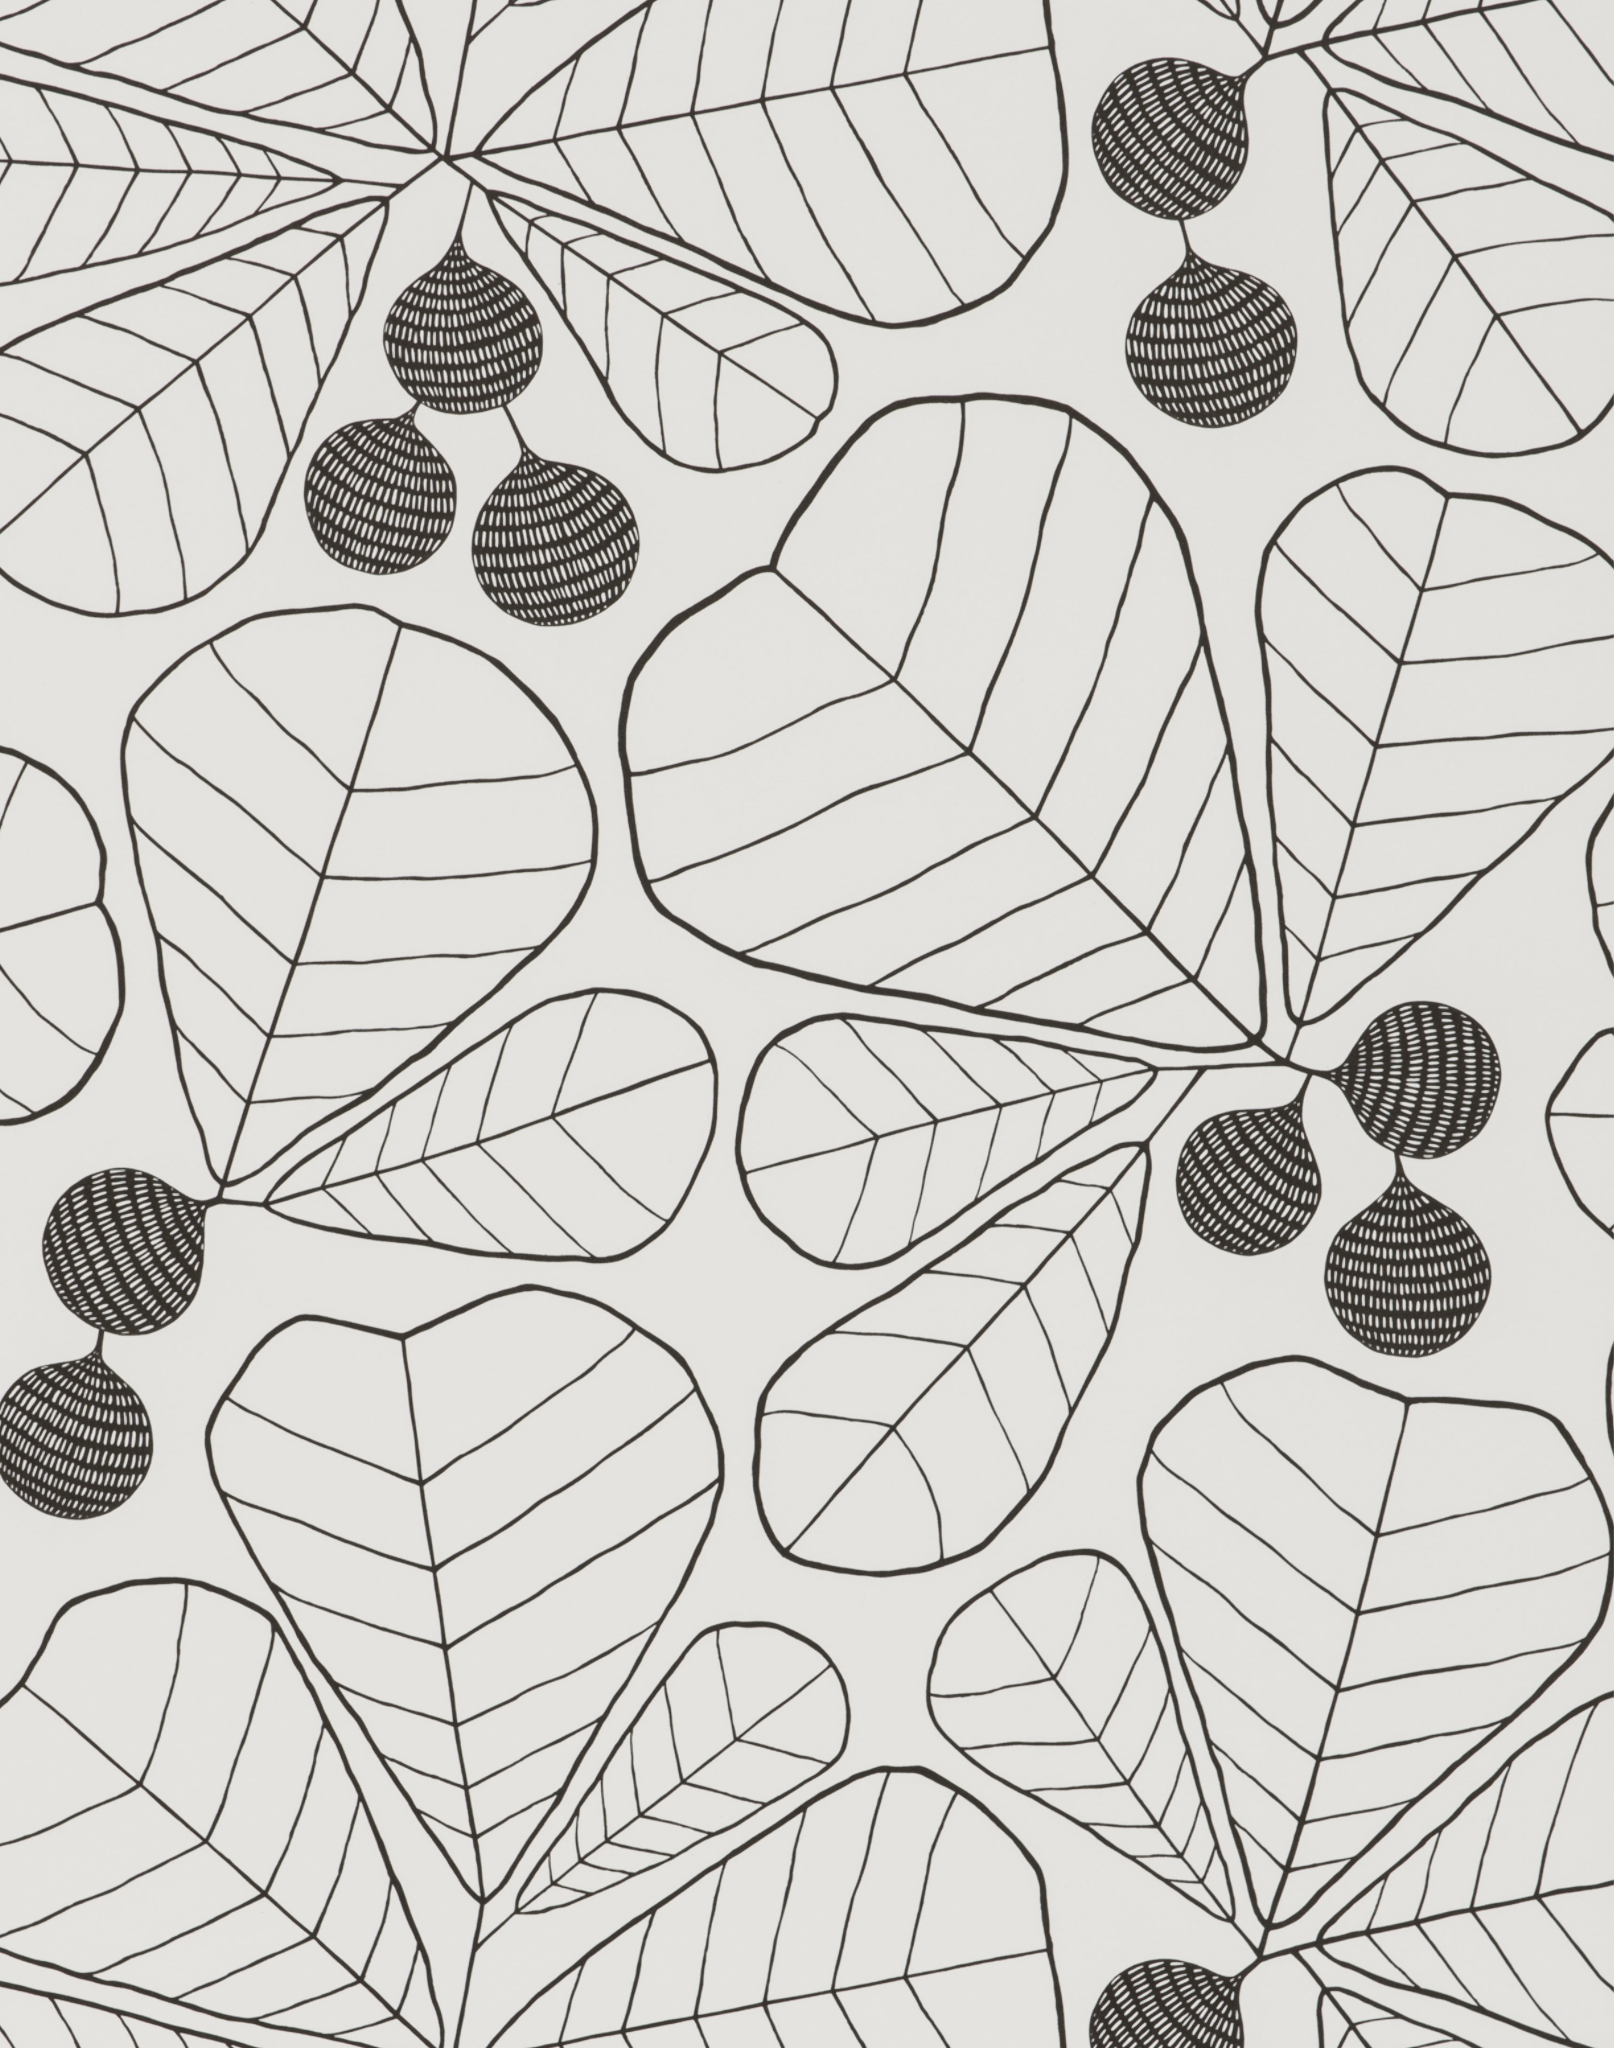 Colorful autumn leaves vector collection | free image by rawpixel.com /  Katie Moir | Leaf drawing, Fall leaves drawing, Leaves doodle